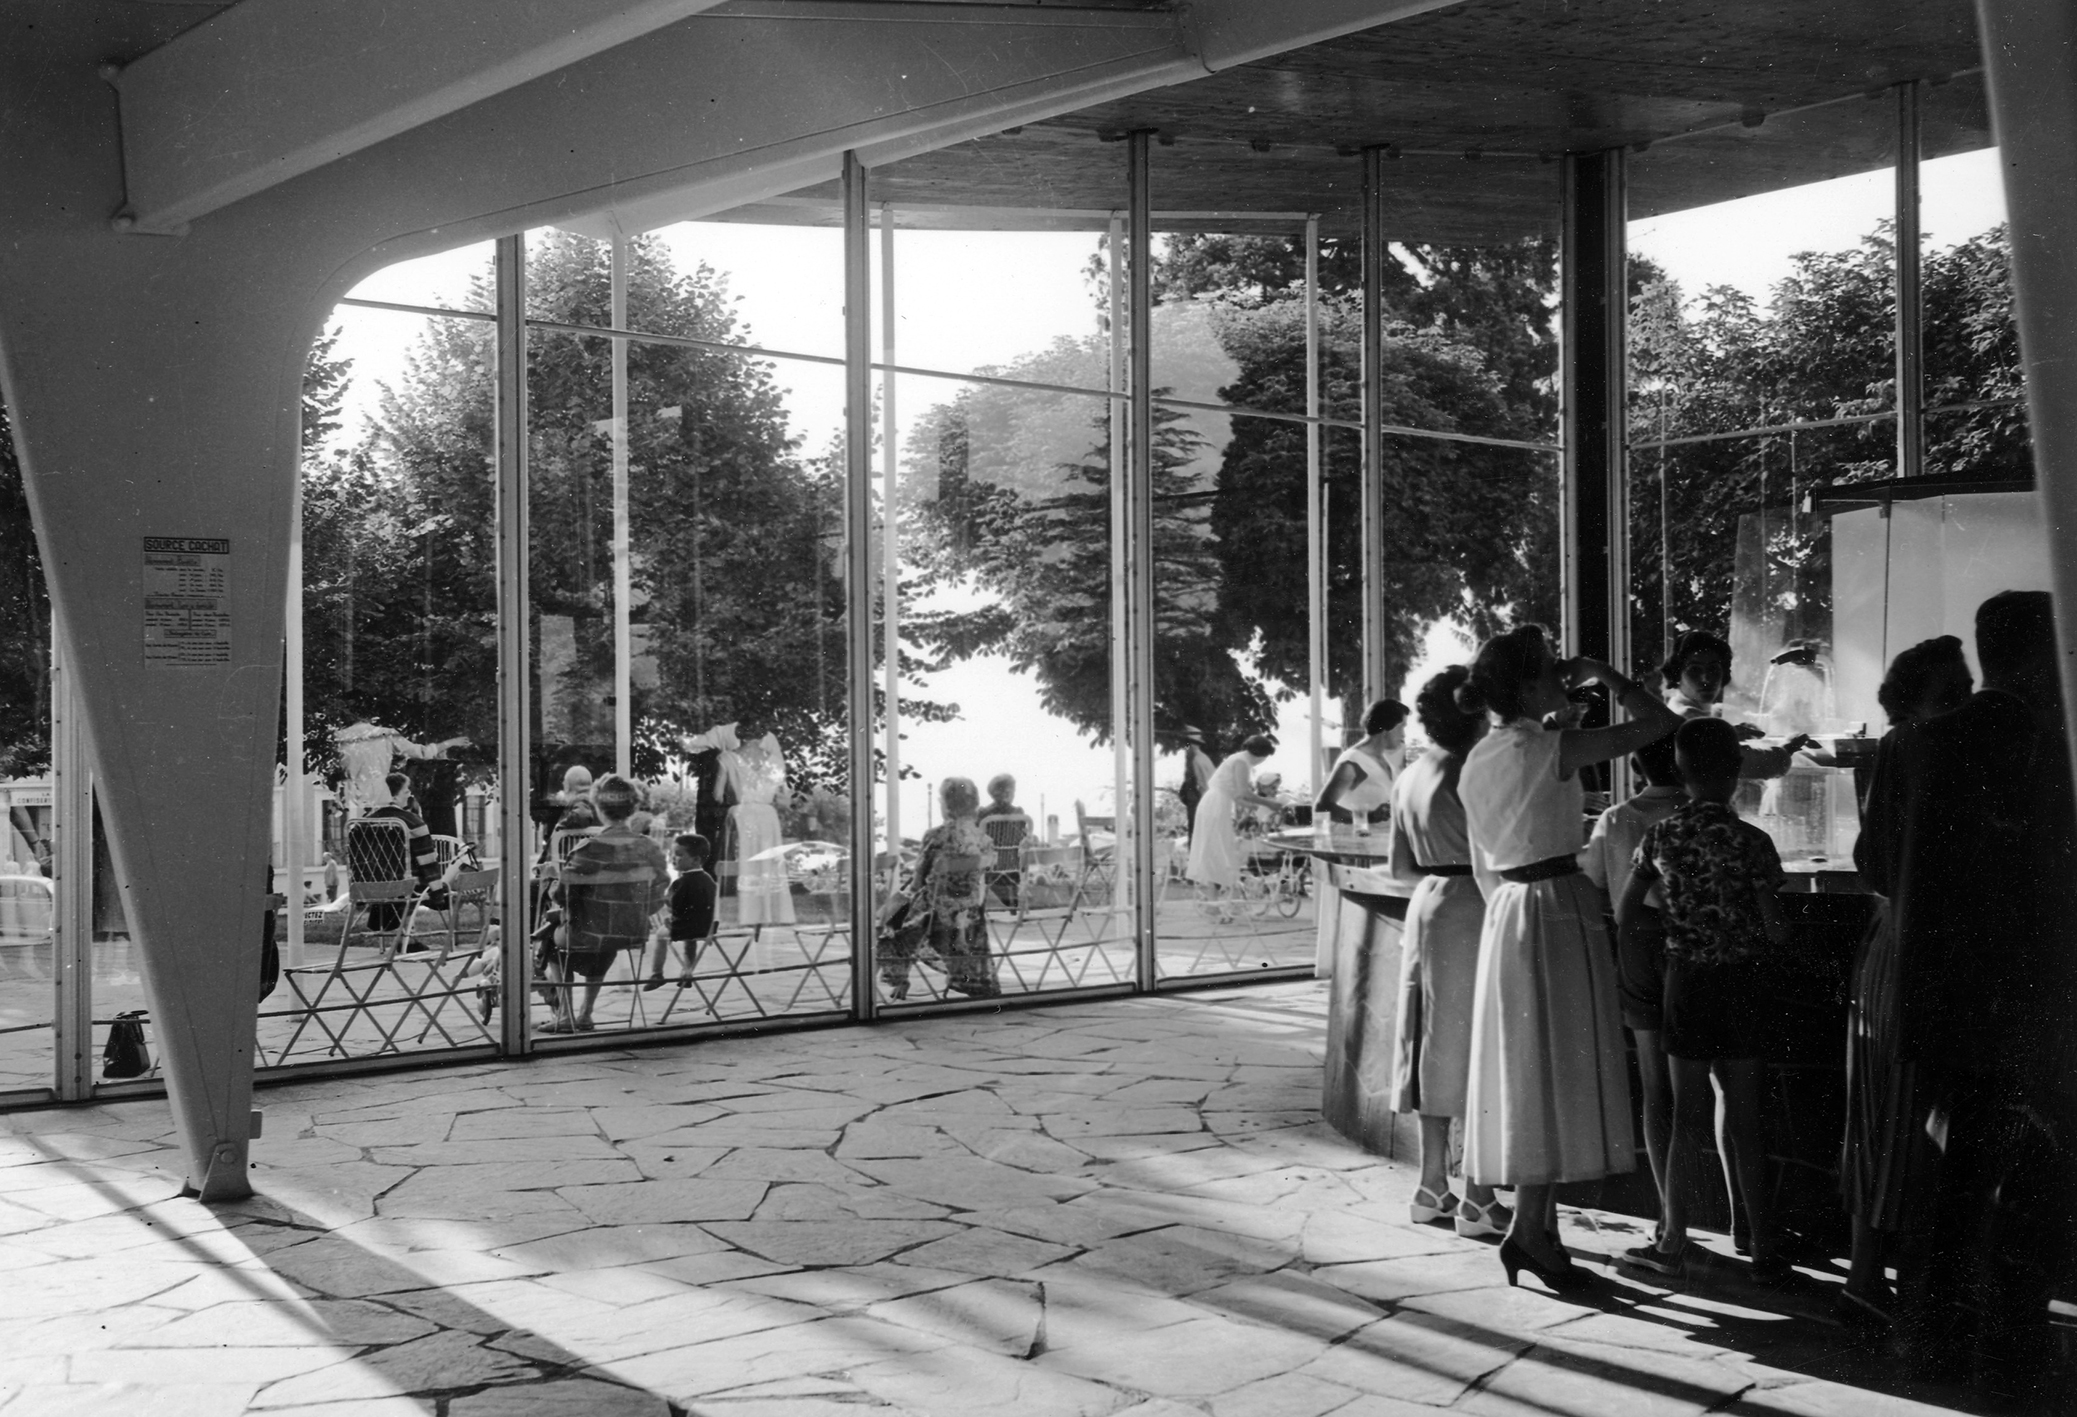 Cachat mineral water pump room, Évian, 1956 (Jean Prouvé, with architect M. Novarina, engineer S. Ketoff).